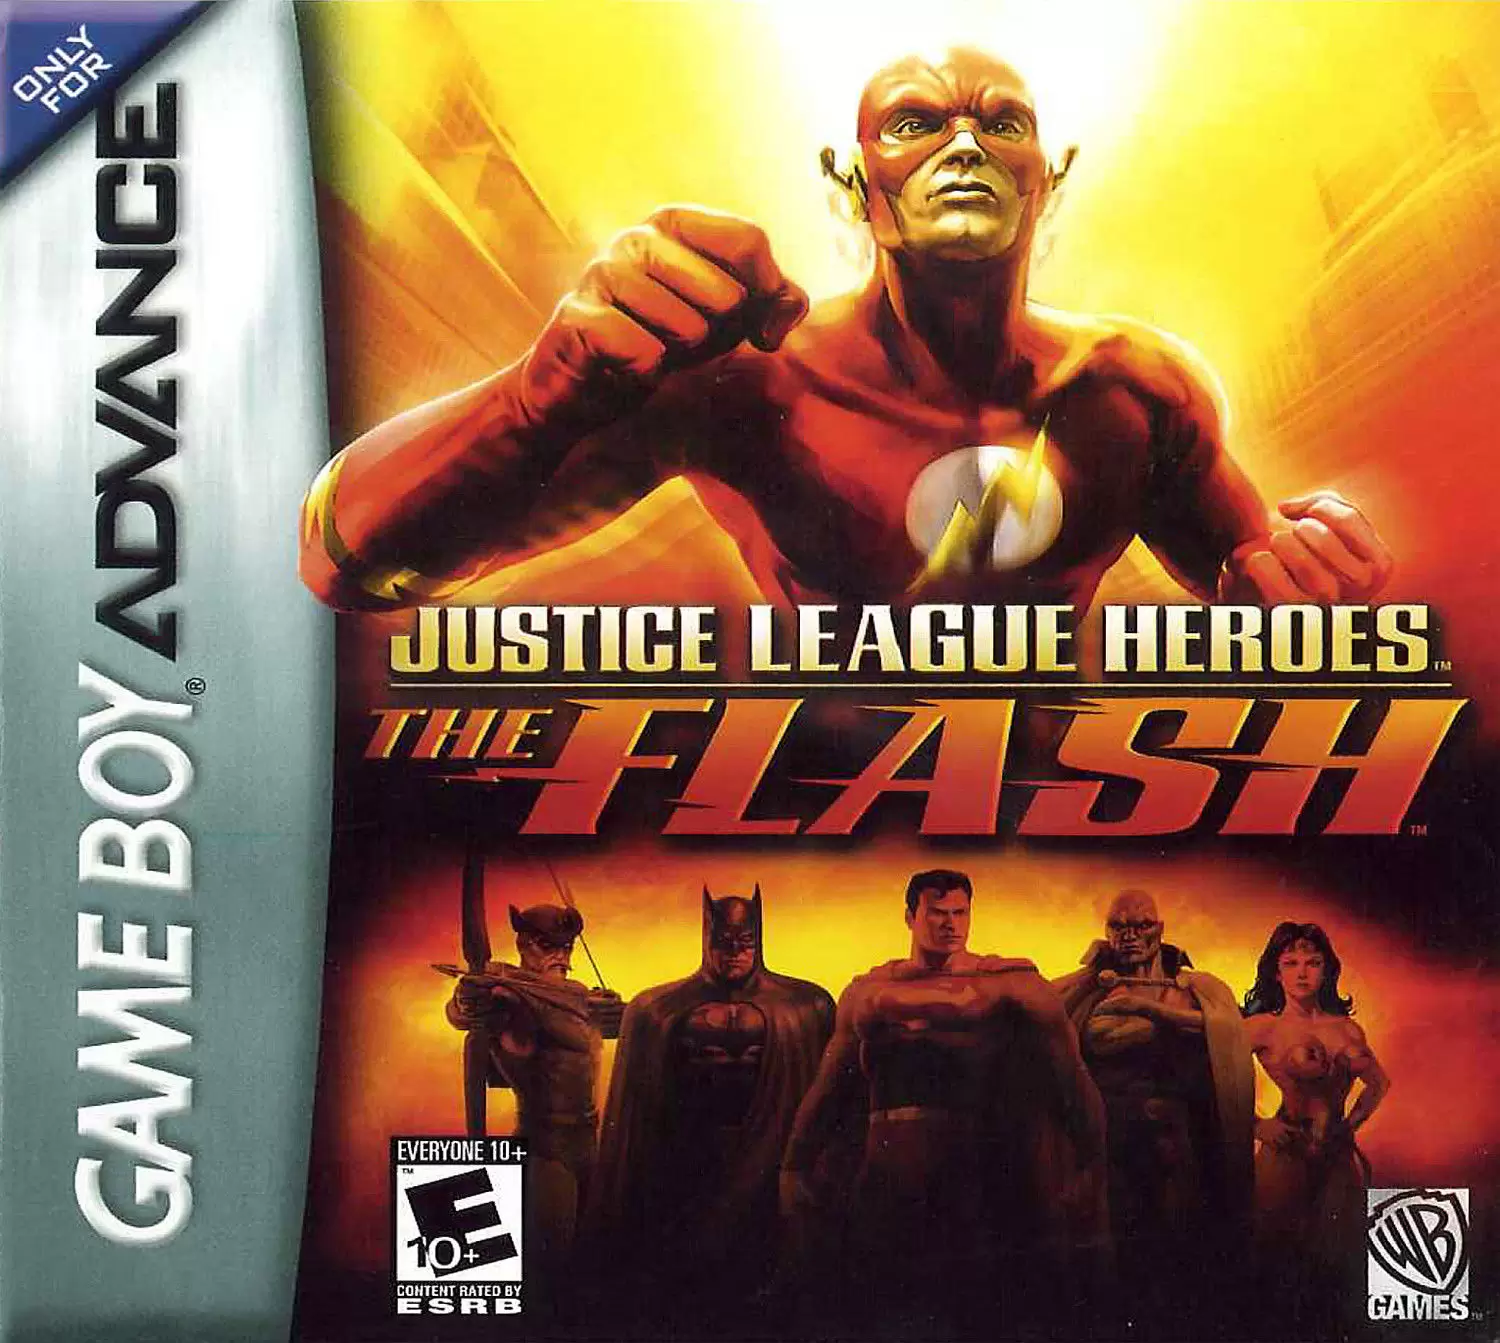 Game Boy Advance Games - Justice League Heroes: The Flash